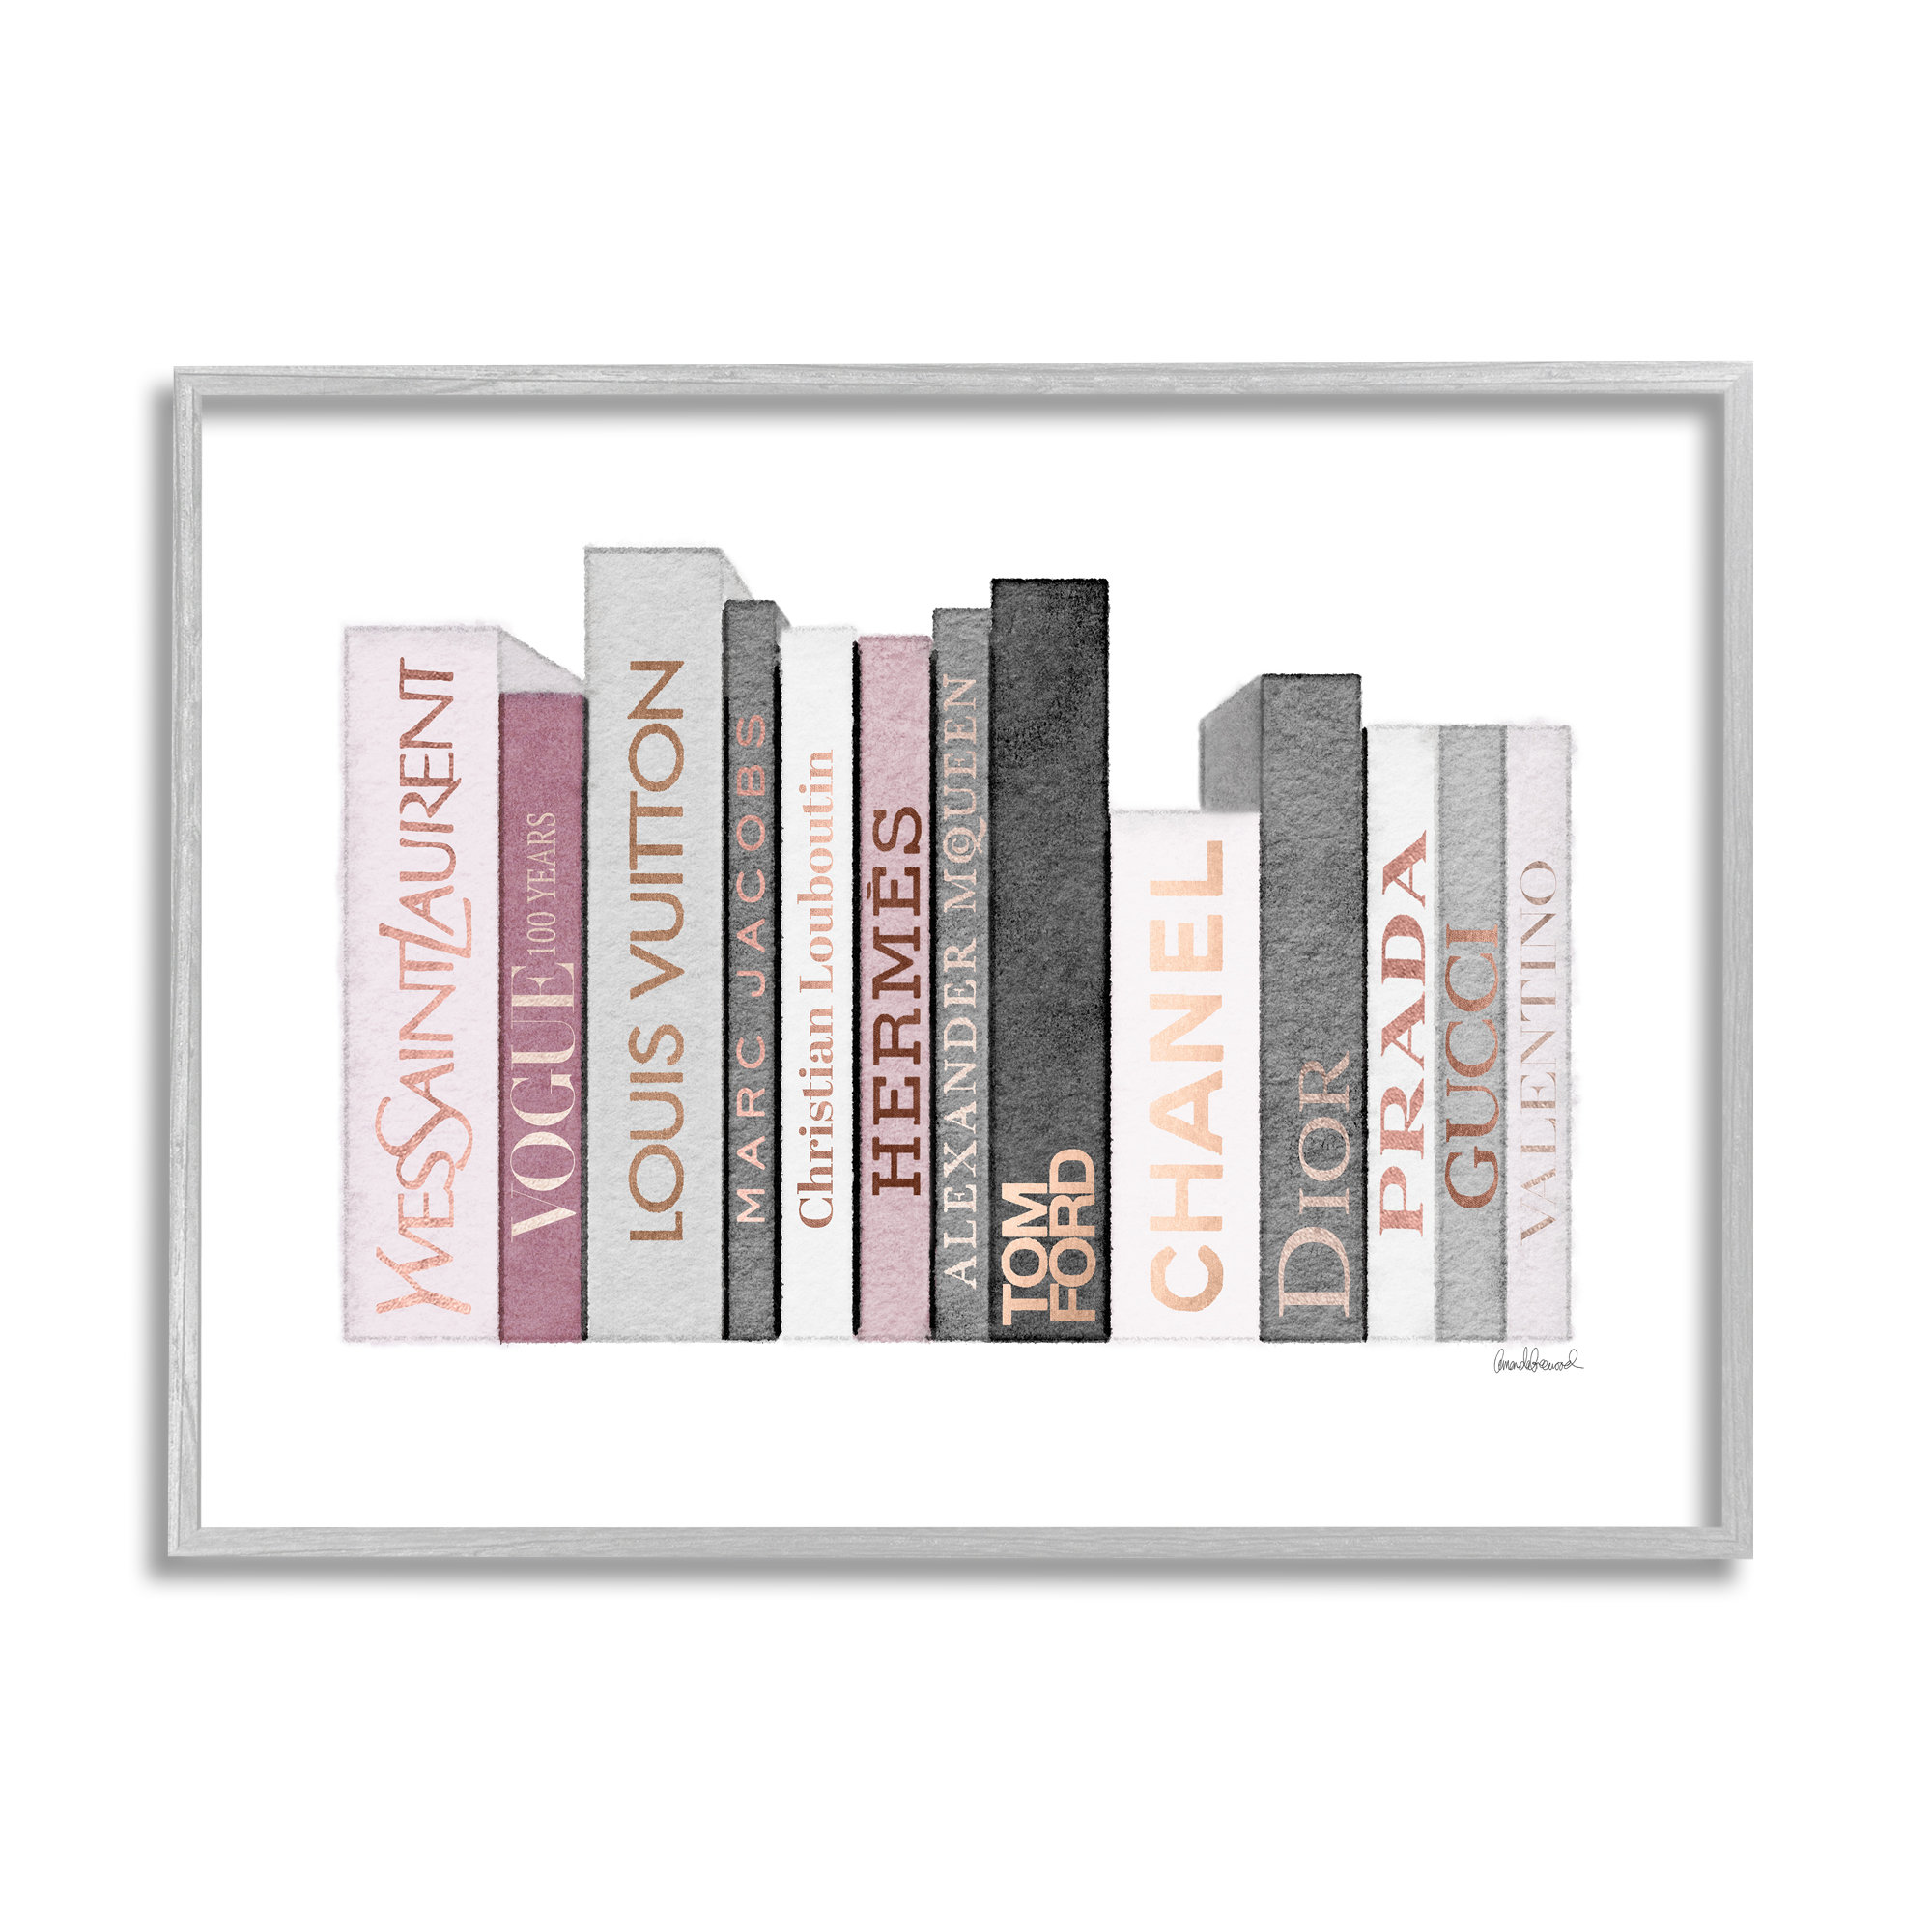  Stupell Industries Glam Fragrance Fashion Book Stack Black  Zebra Print, Designed by Madeline Blake Canvas Wall Art, 36 x 36: Posters &  Prints